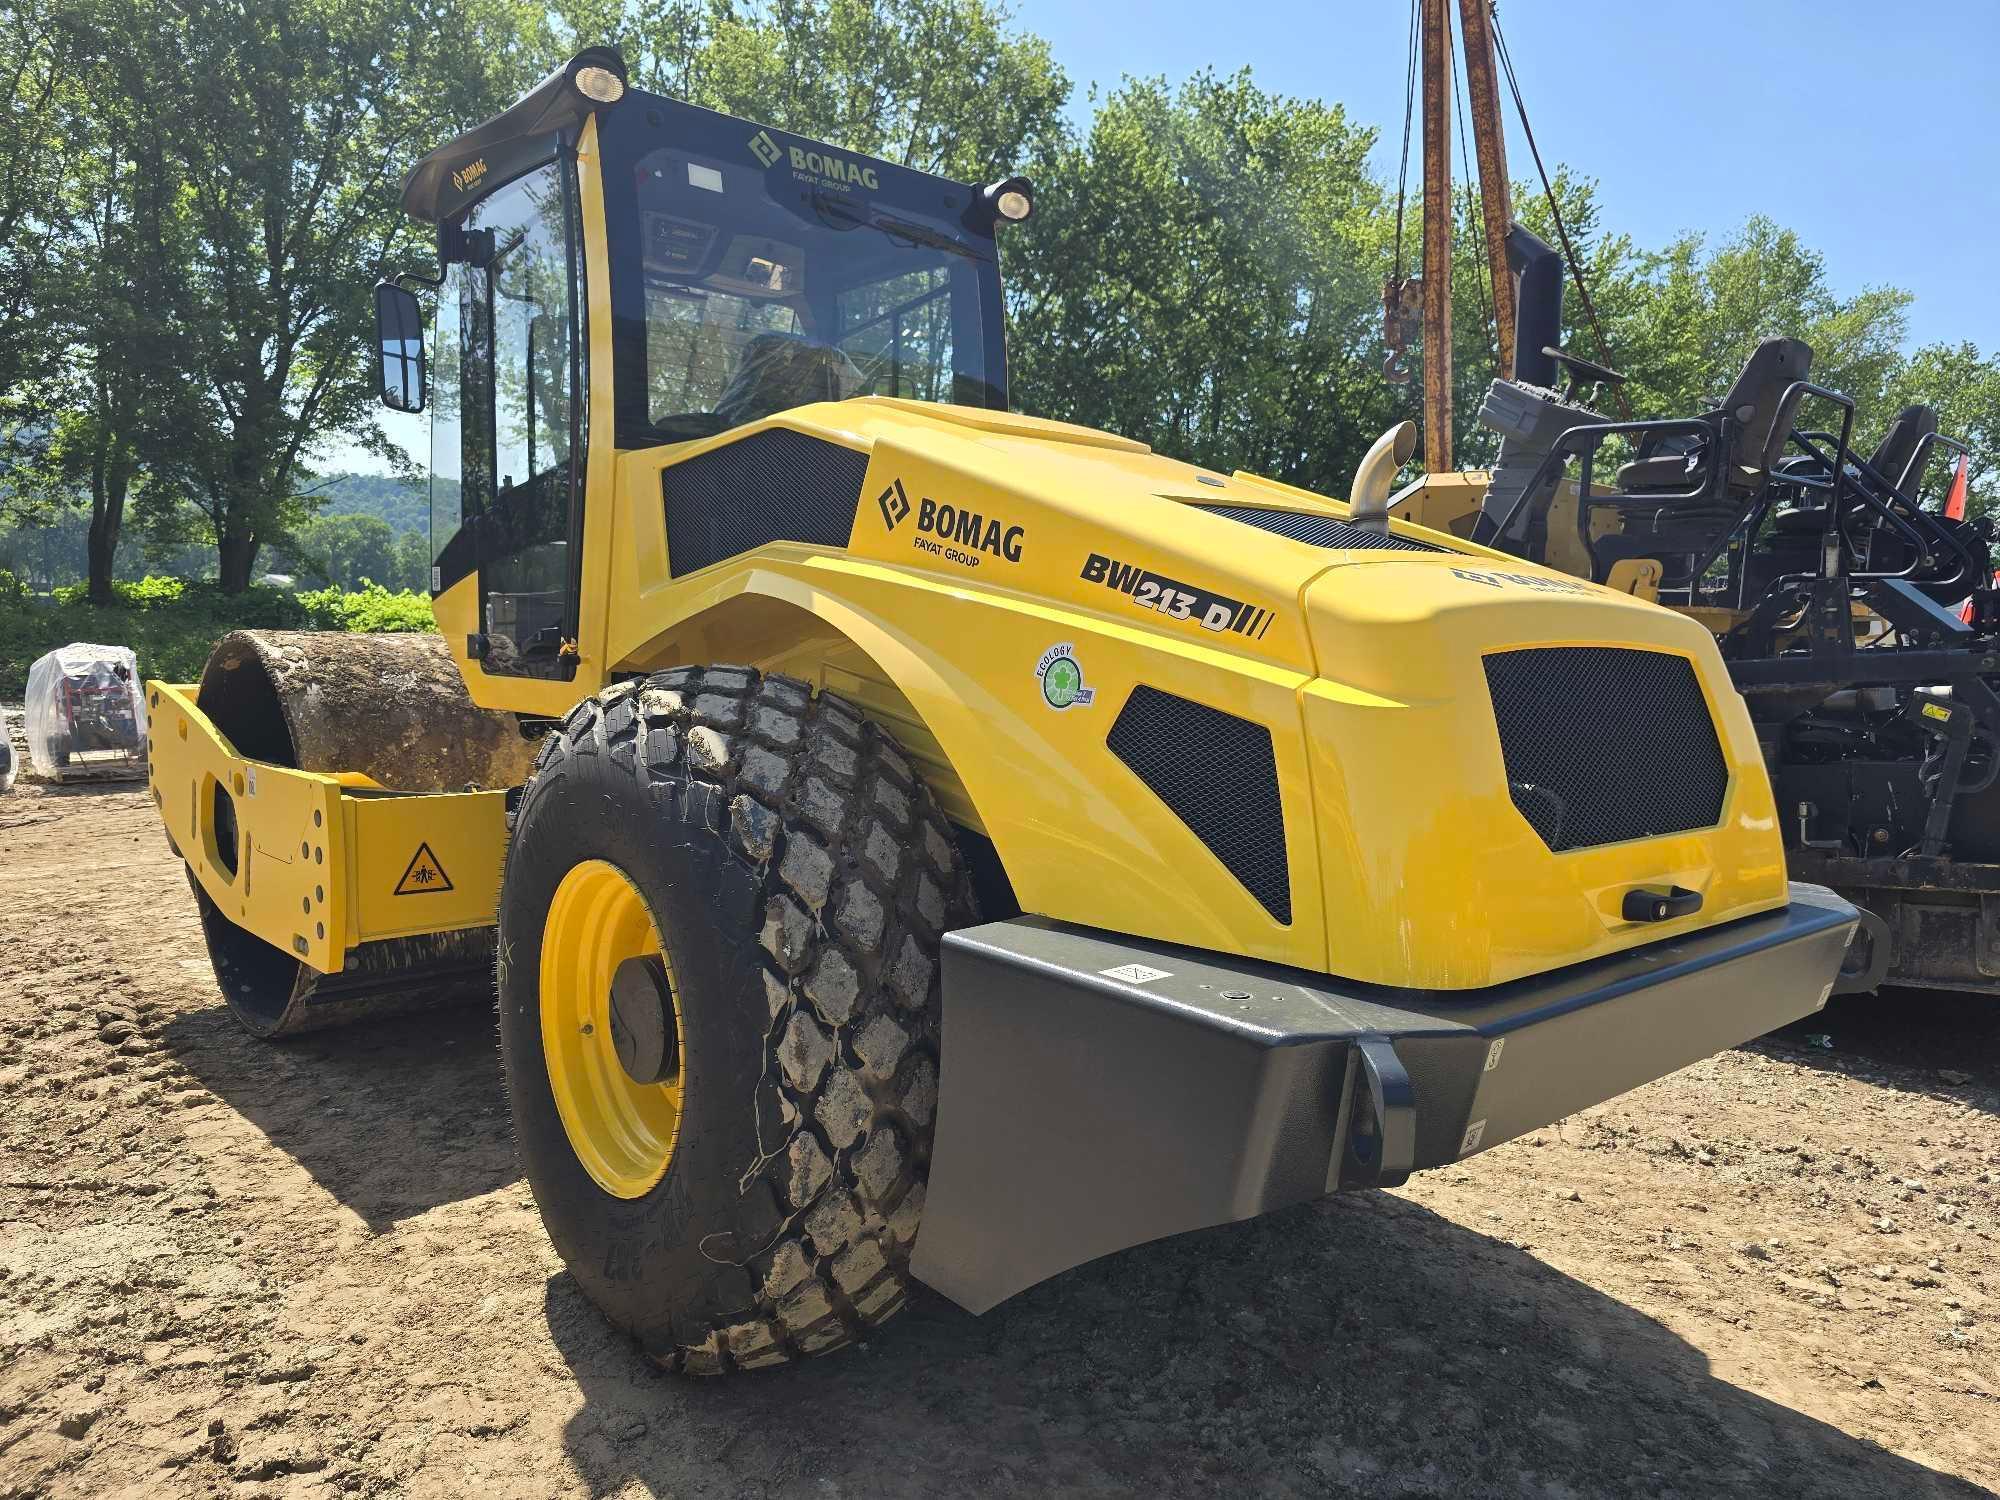 UNUSED BOMAG BW213D-5 VIBRATORY ROLLER SN-719619, powered by Deutz TCD 3.6L4 diesel engine, equipped